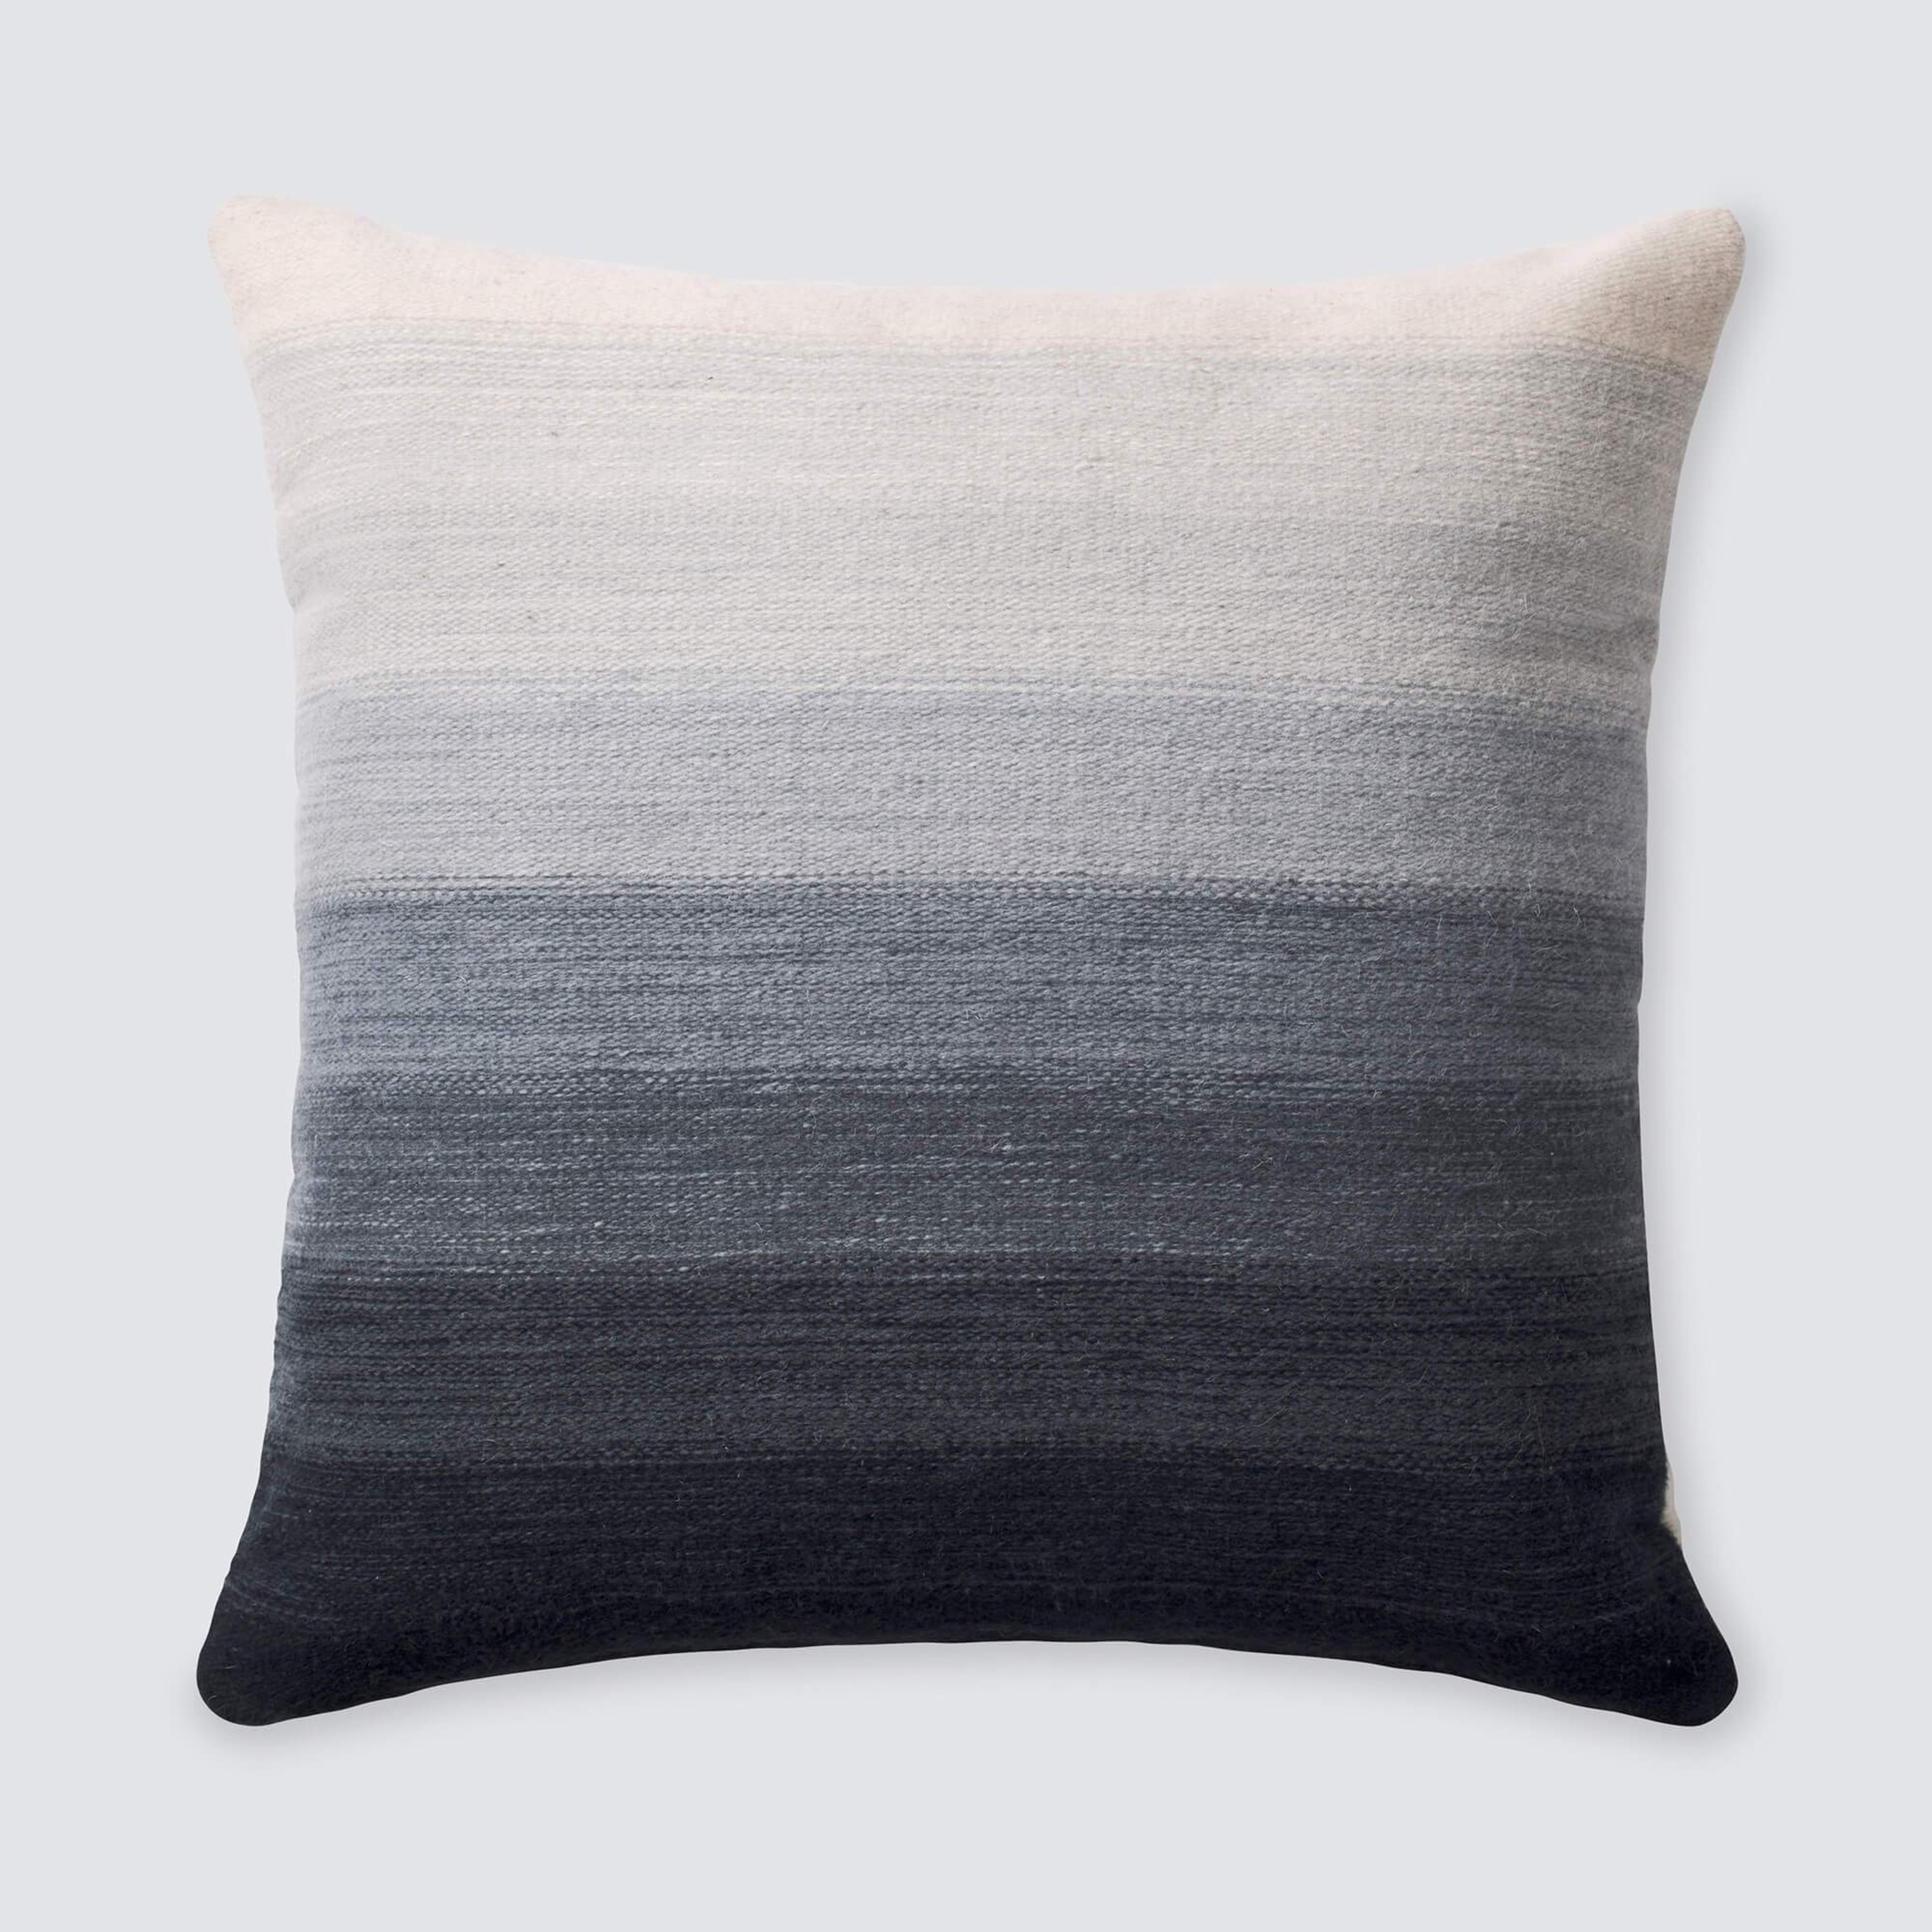 Marea Pillow - Indigo - 22 in. x 22 in. By The Citizenry - The Citizenry